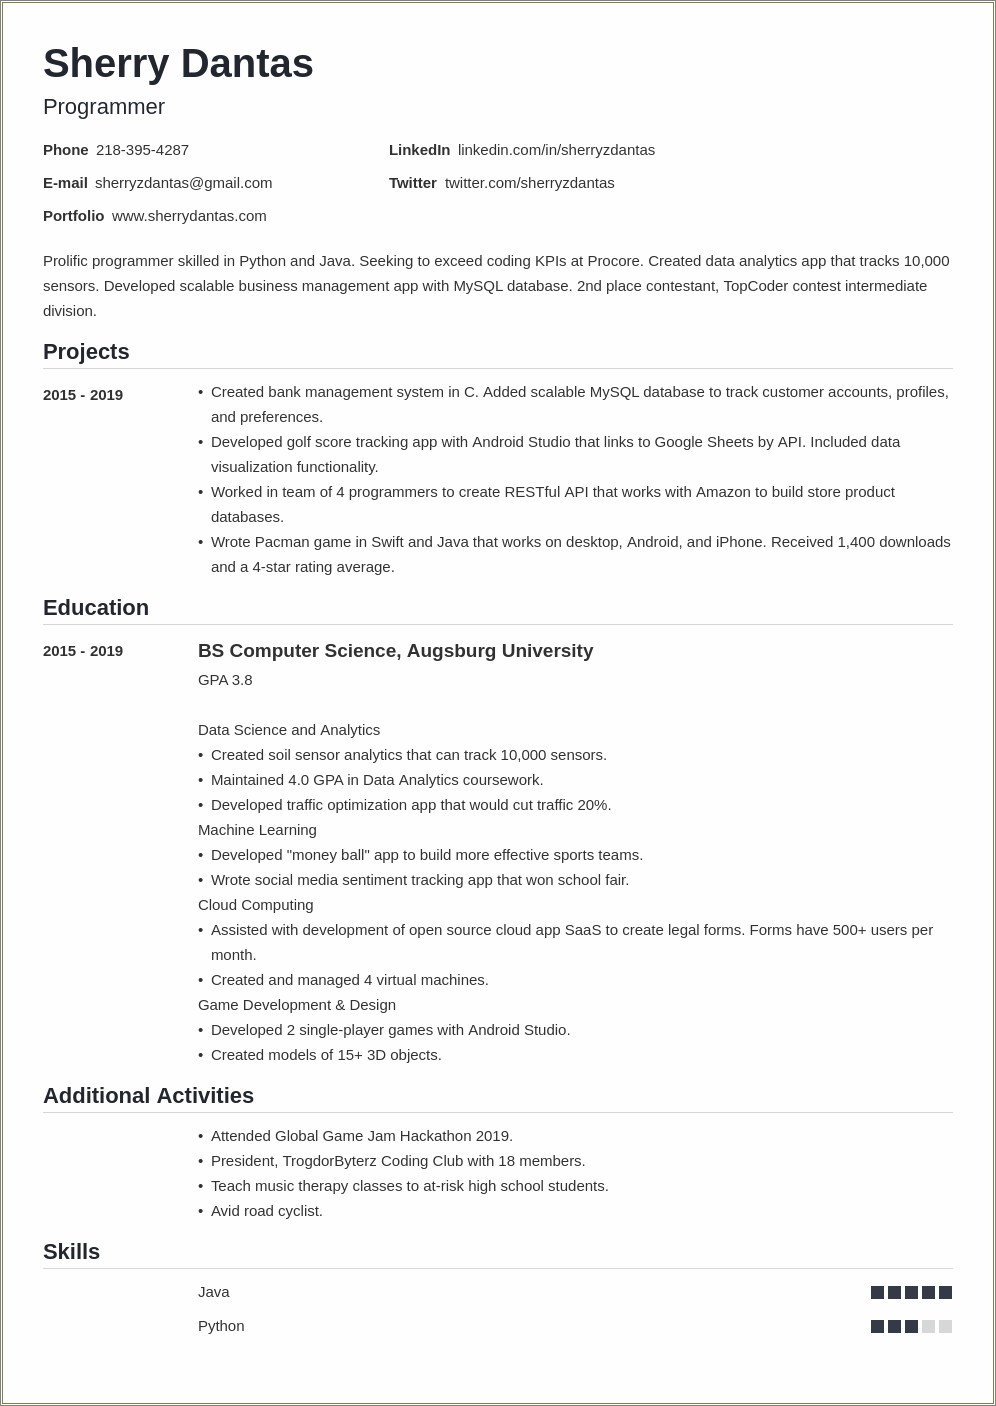 Resume Examples For College Graduate With No Experience